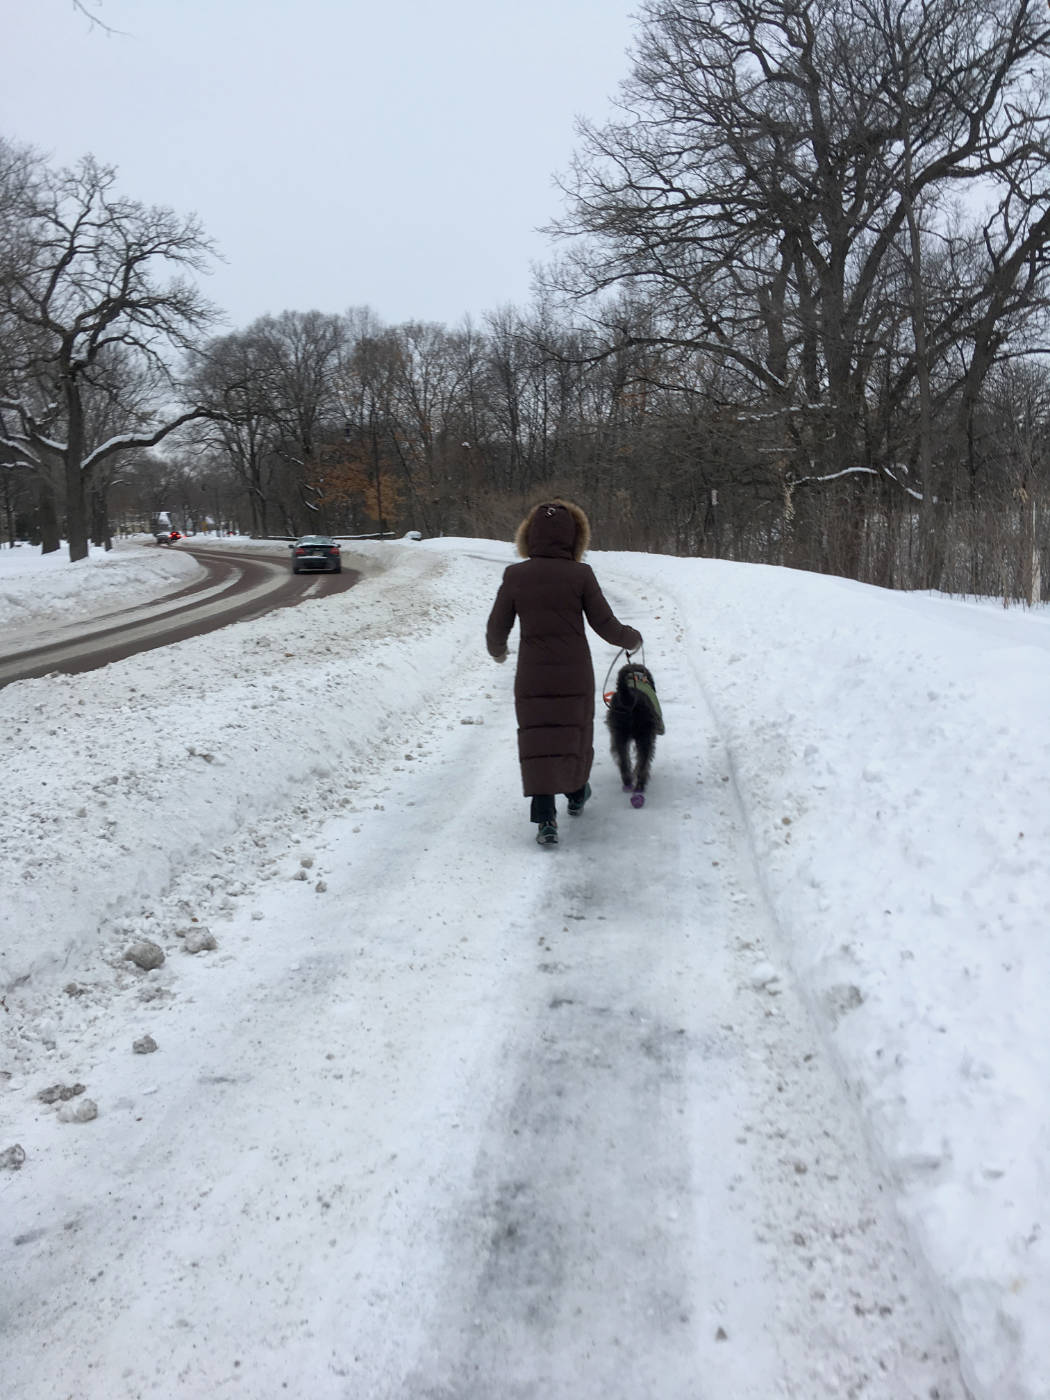 Back of a person with hooded, long winter coat walking a dog on a snow path with bare trees on a gray day